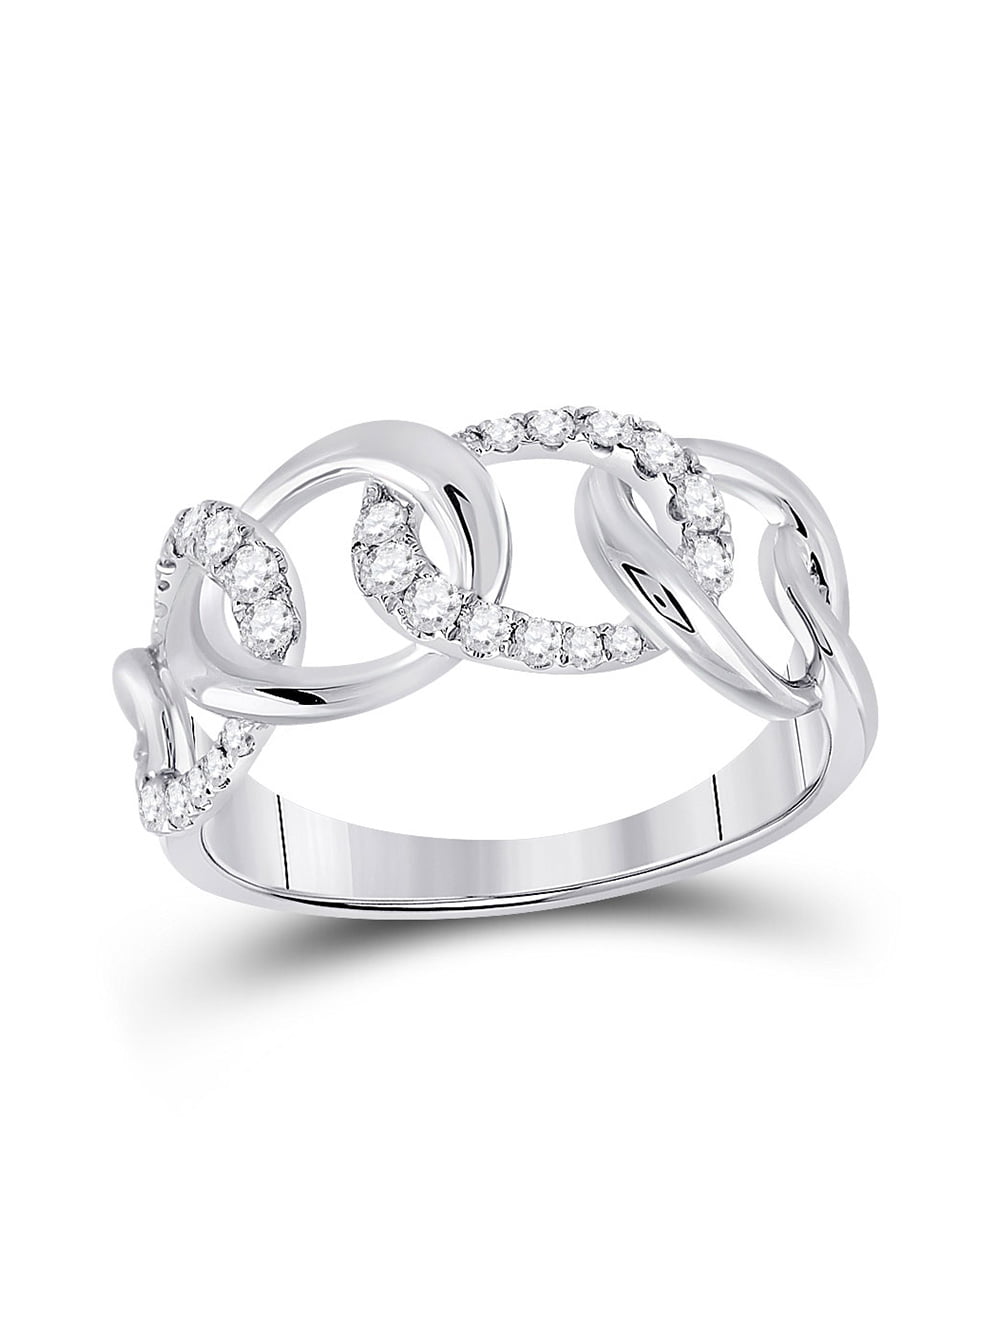 2.5mm Silver Stackable 1/3 Cttw HI/I3 Diamond Scalloped Band